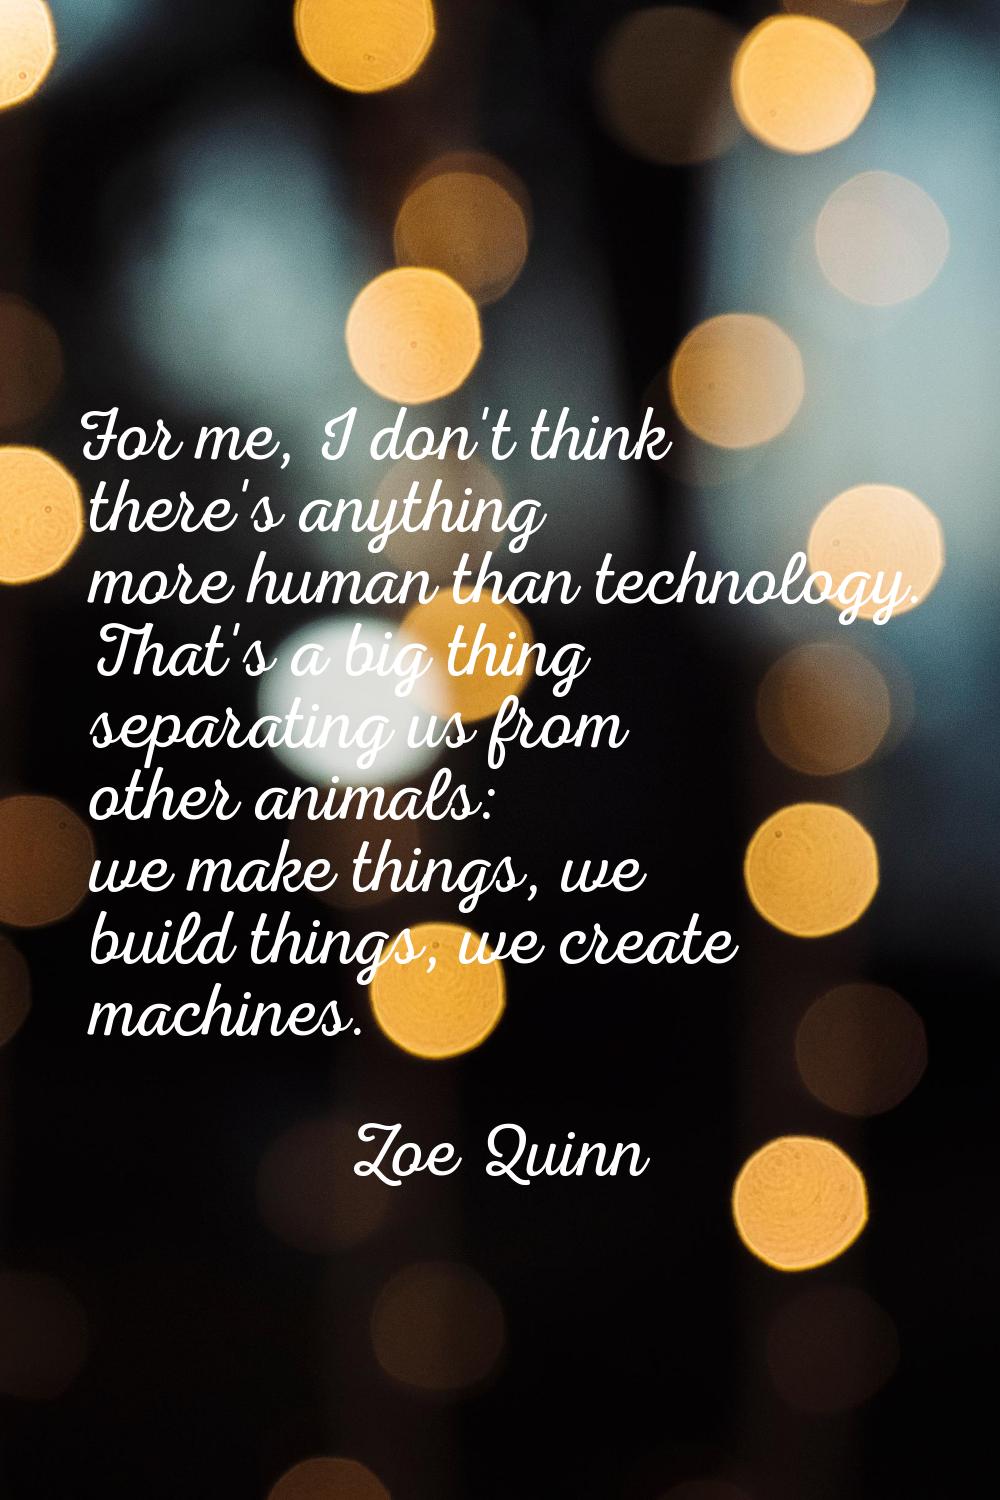 For me, I don't think there's anything more human than technology. That's a big thing separating us